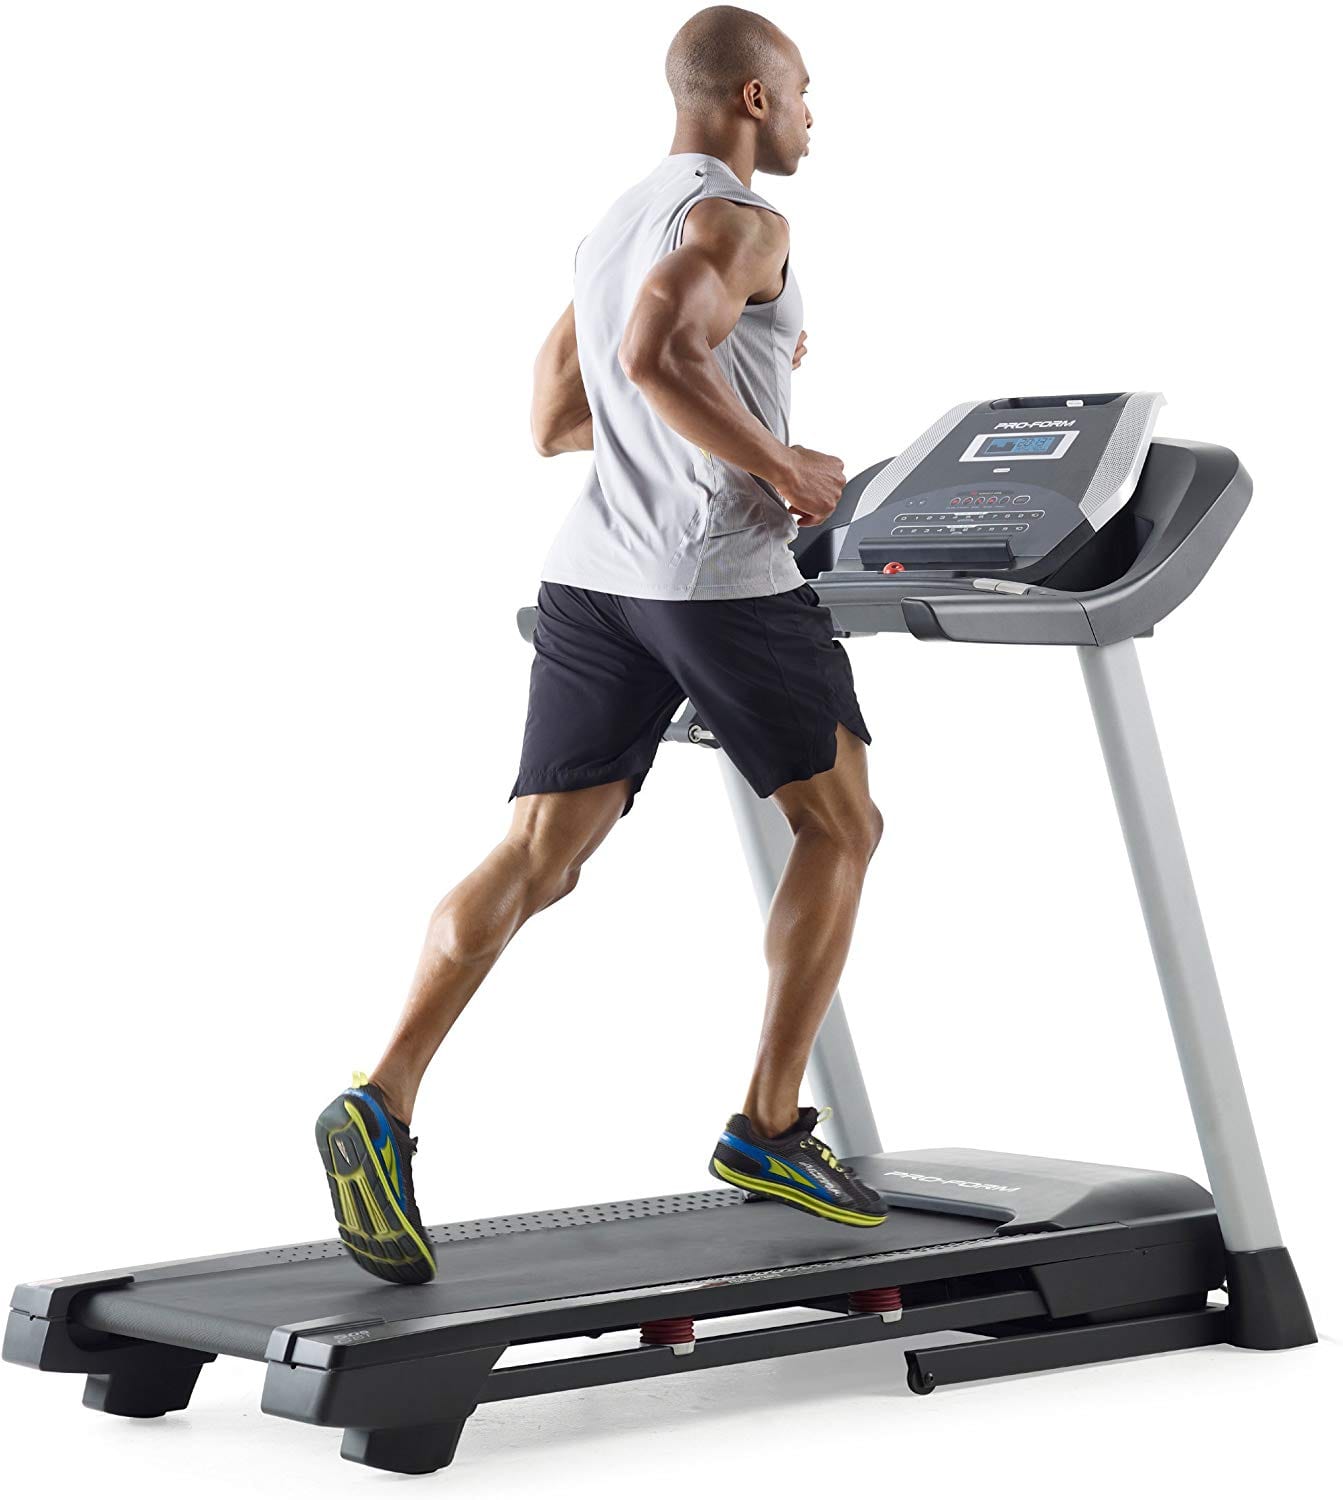 The Best ProForm Treadmill for Gym: Key Comparison & Guide